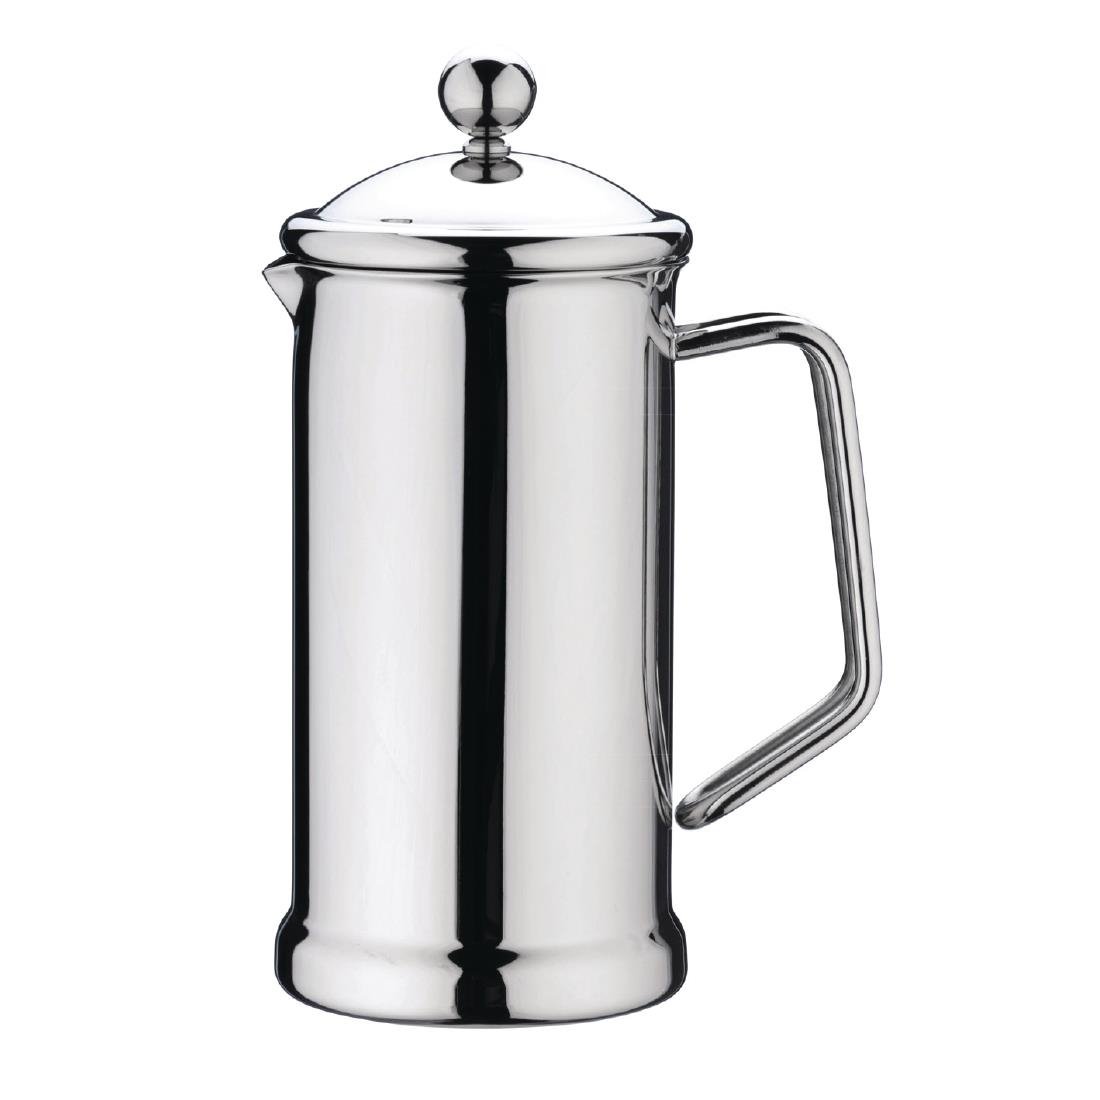 GL648 Polished Stainless Steel Cafetiere 6 Cup JD Catering Equipment Solutions Ltd